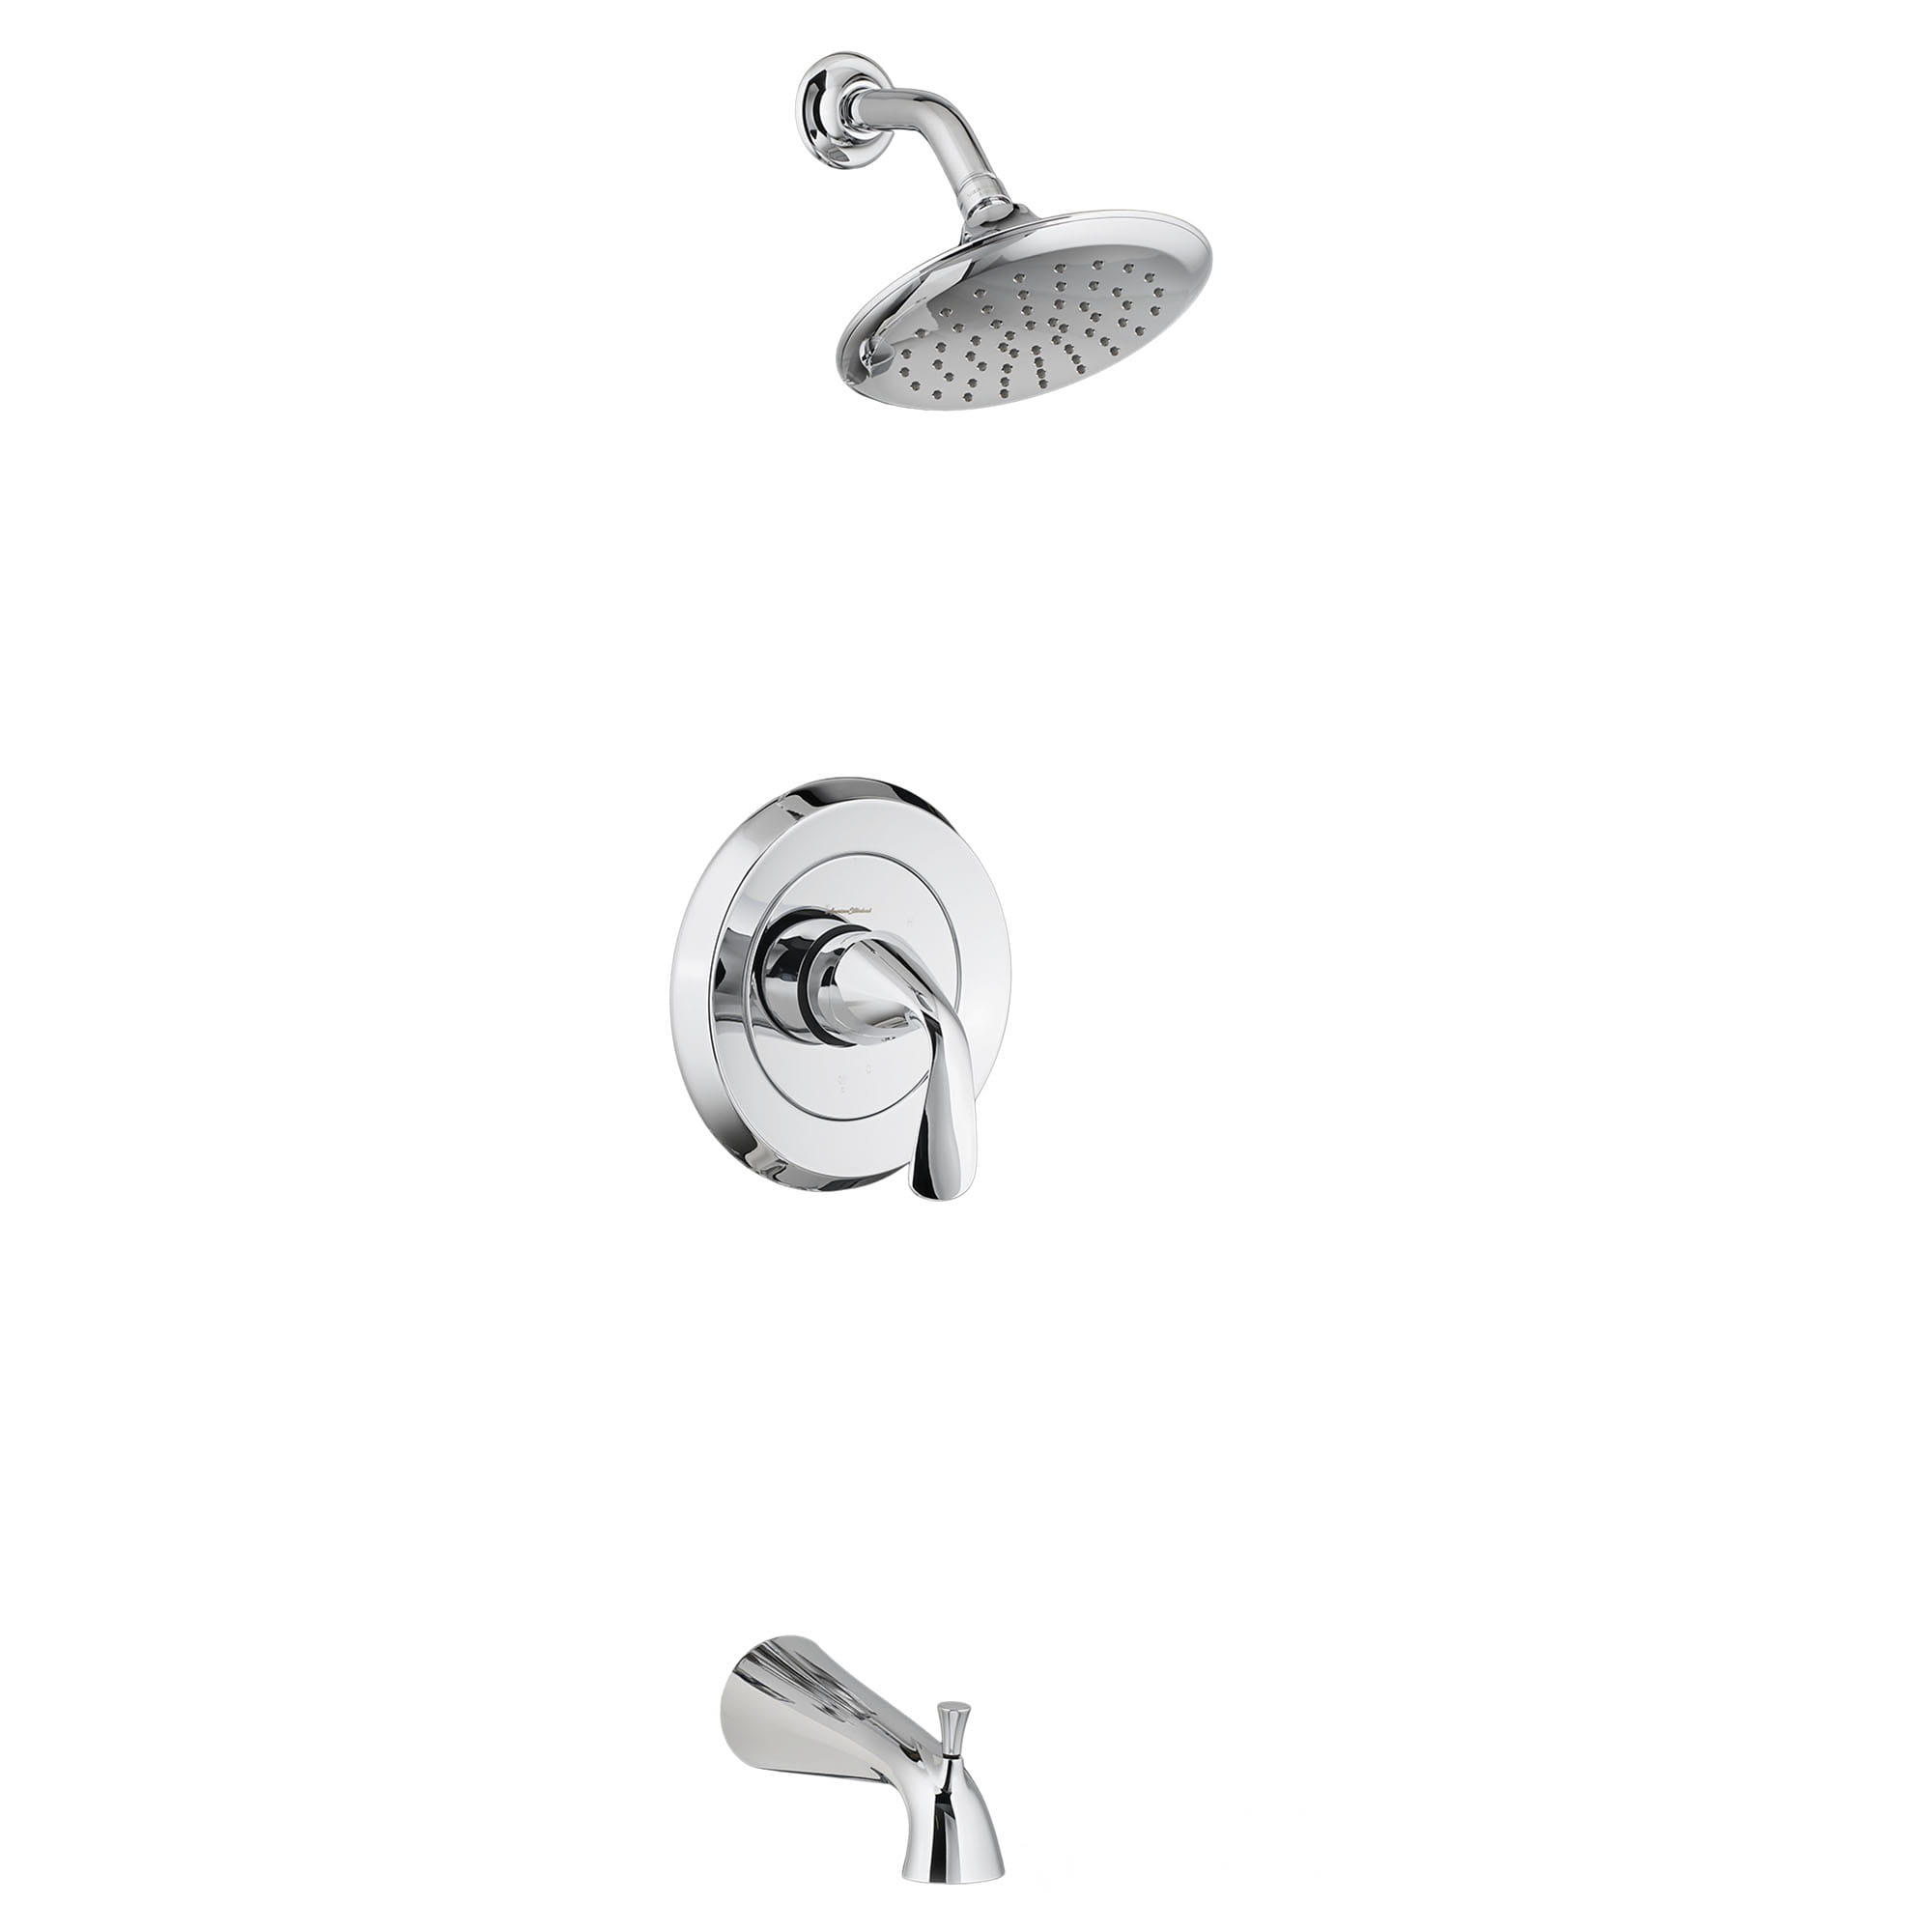 Fluent® 1.8 gpm/6.8 L/min Tub and Shower Trim Kit With Water-Saving Showerhead, Double Ceramic Pressure Balance Cartridge With Lever Handle